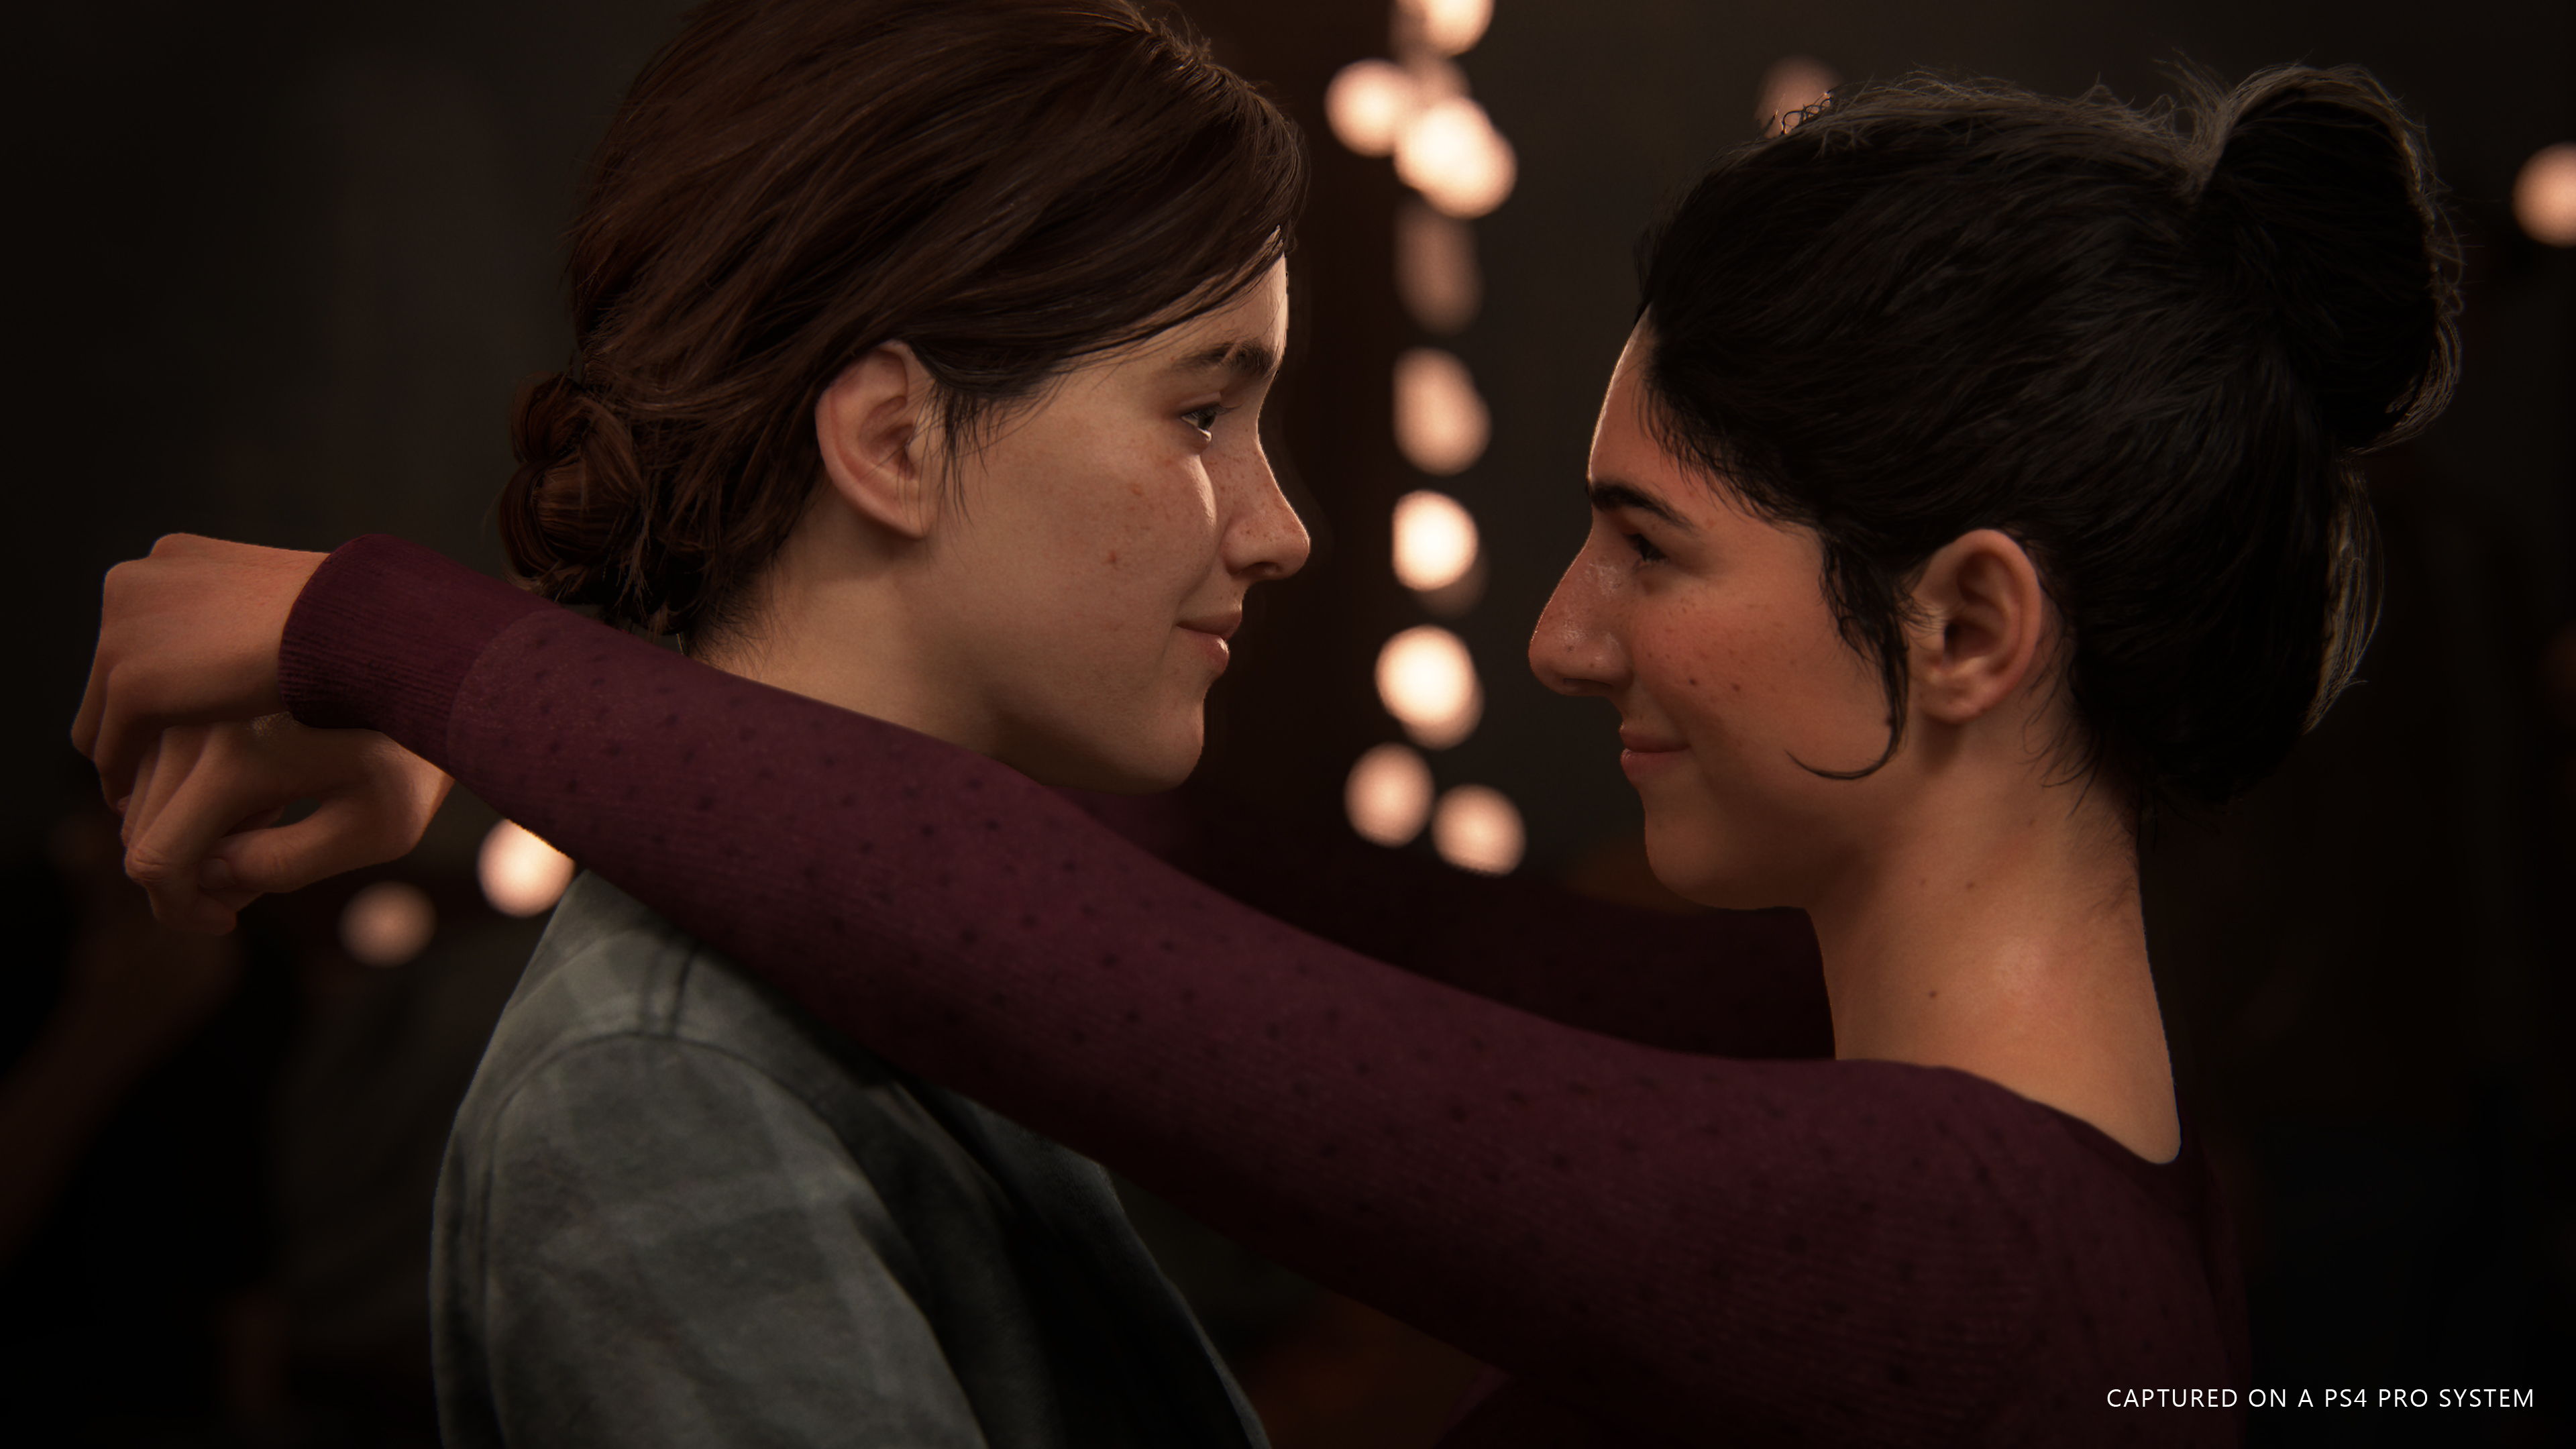 download ellie the last of us for free